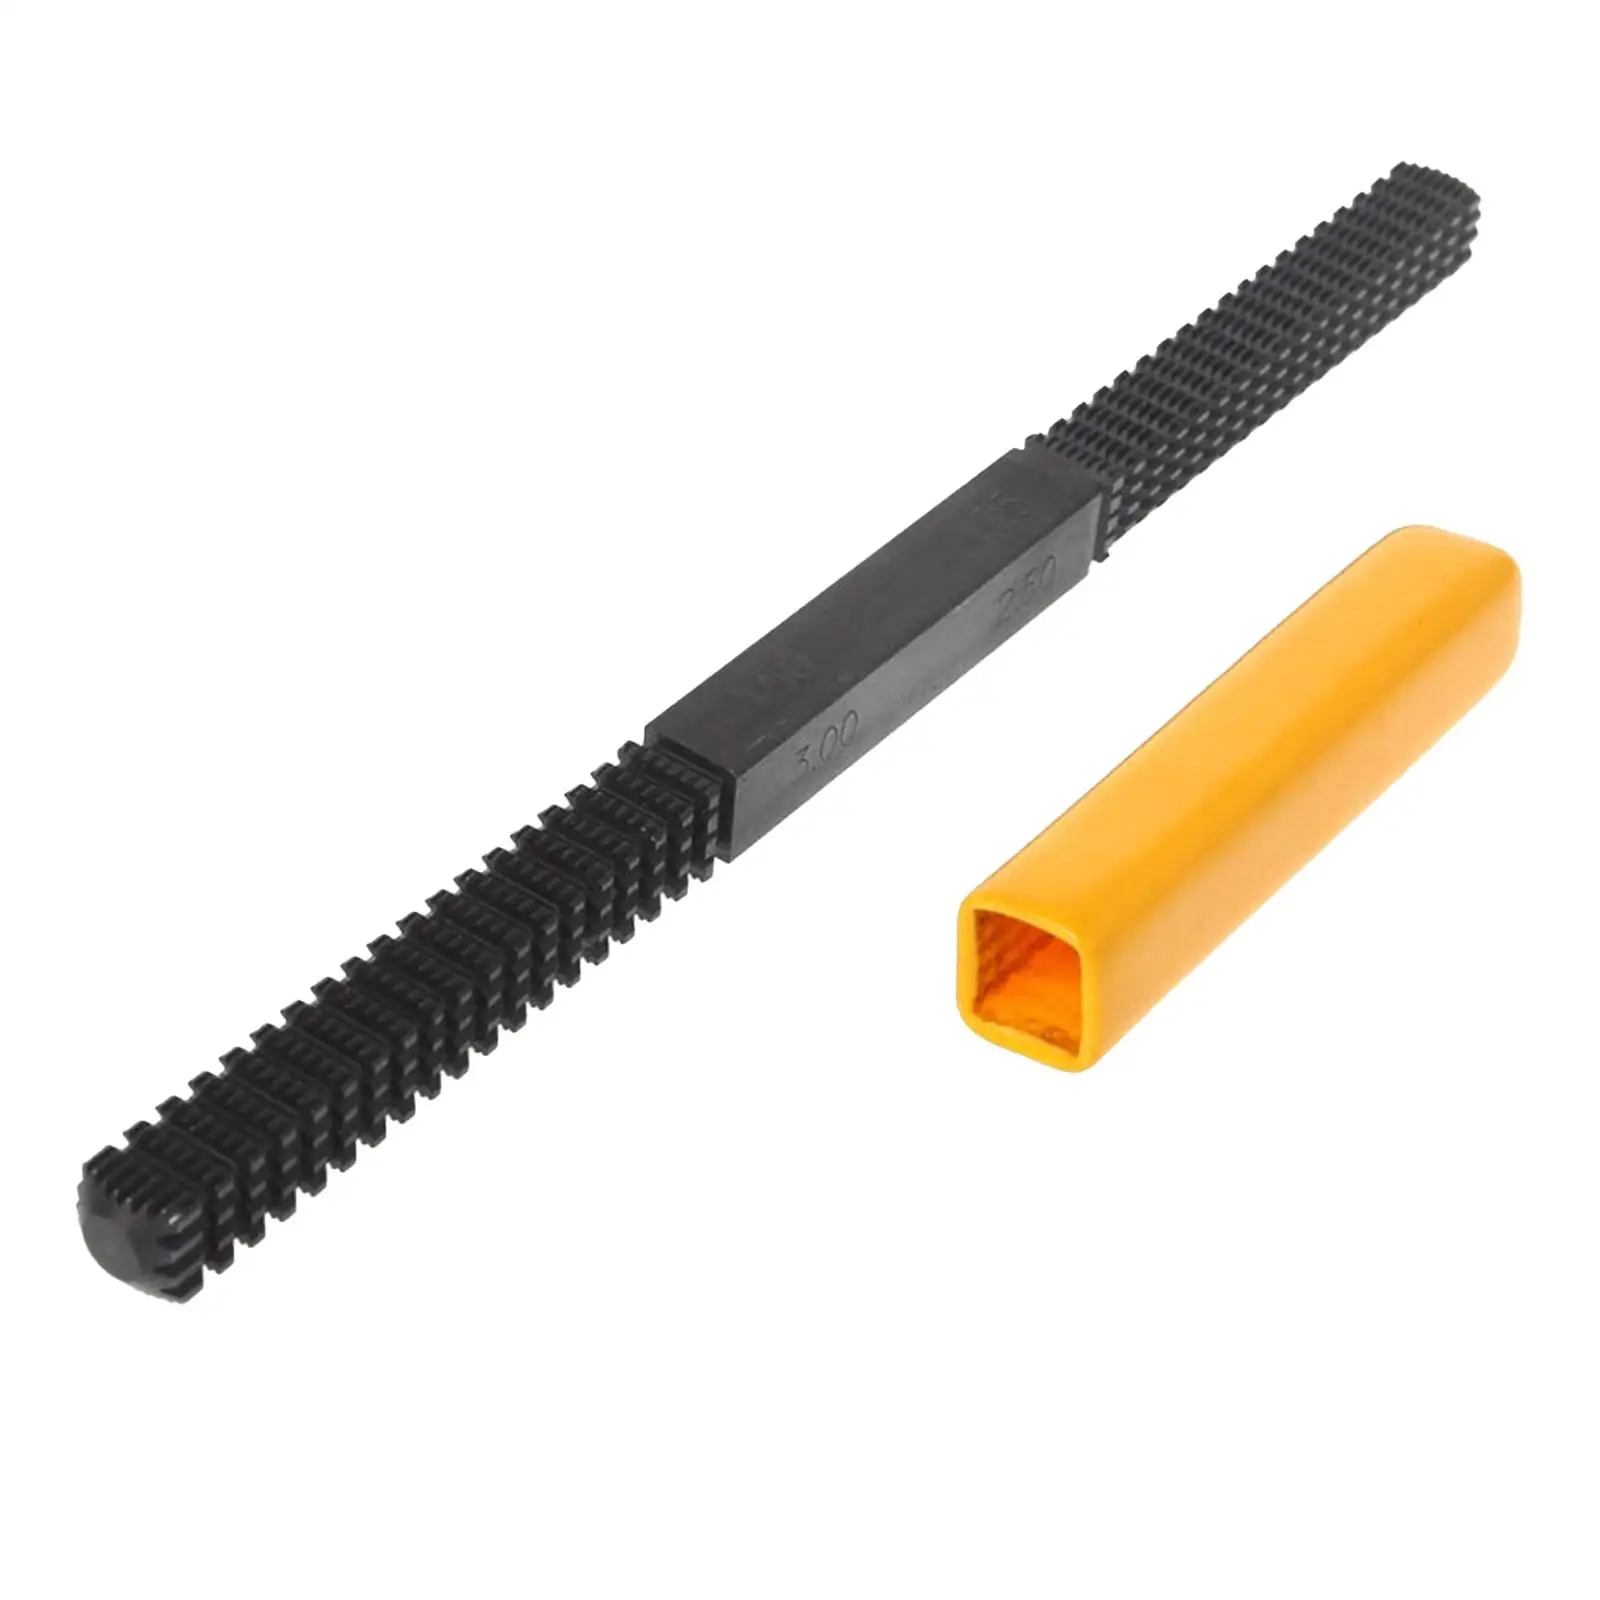 Thread Repair File Easy to Use Portable Sturdy for Screws Pipes Repair Parts